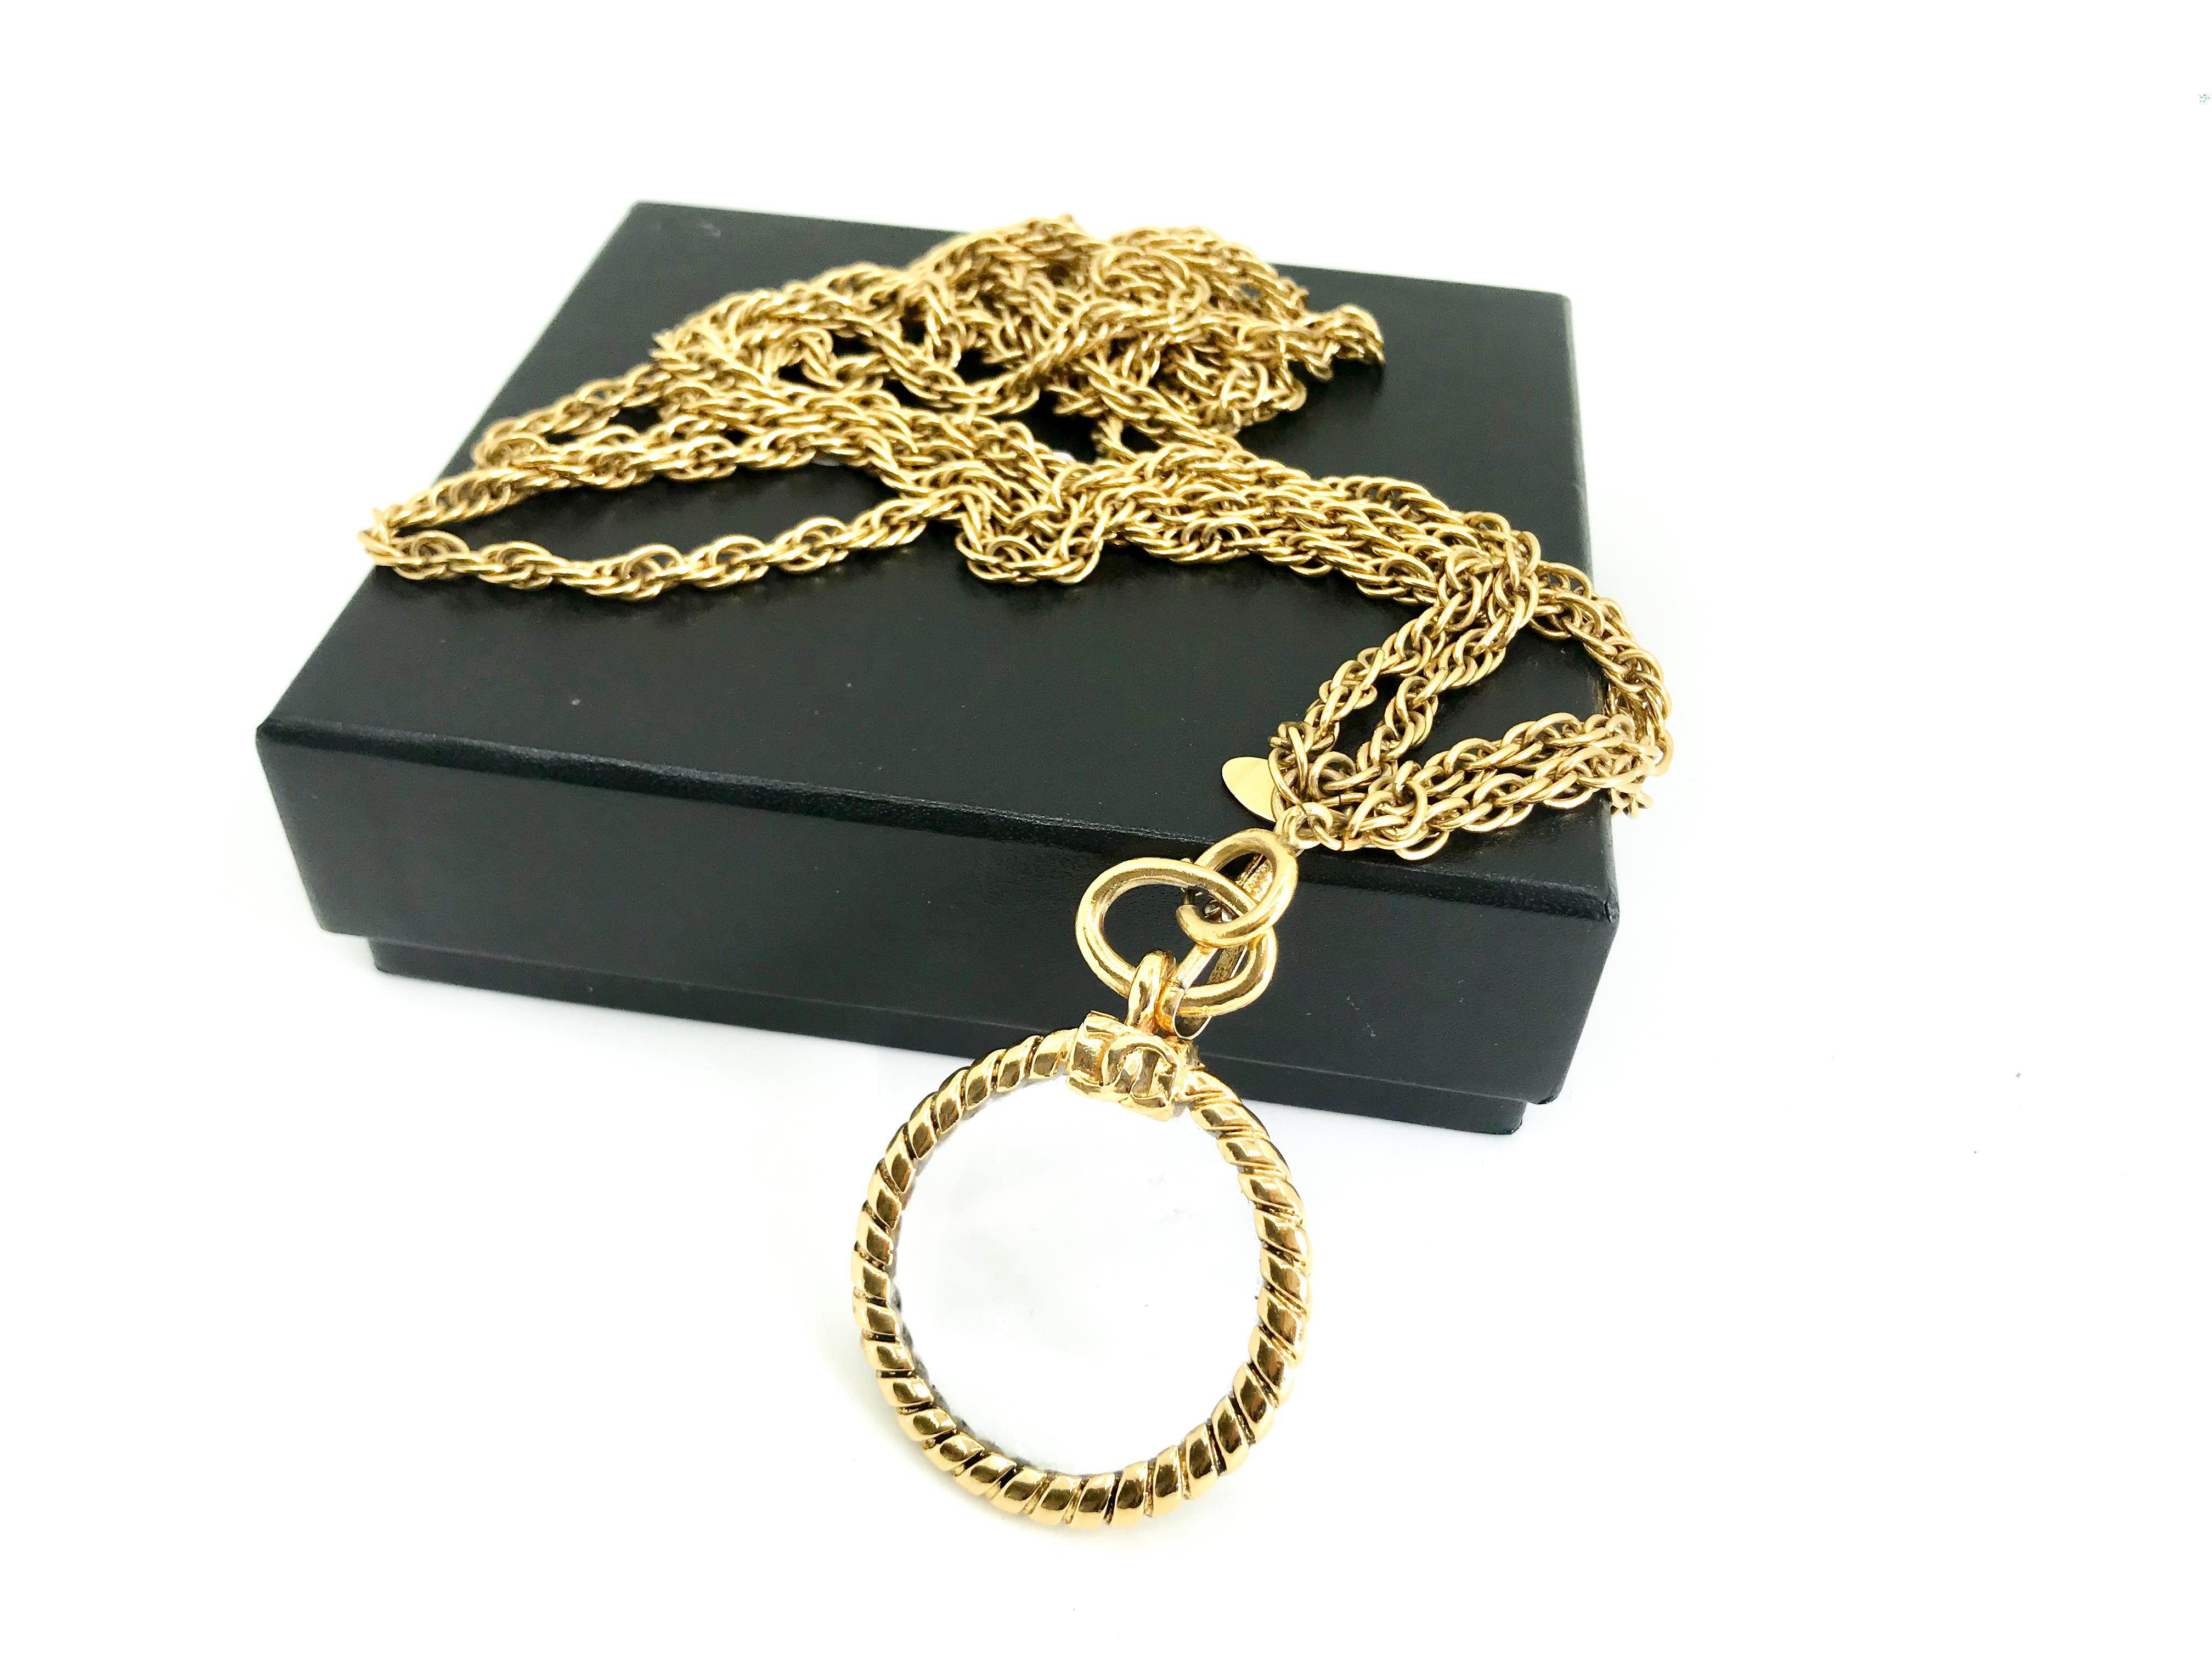 Chanel 1980s vintage long magnifying glass loupe gold plated pendant necklace.

This original magnifying pendant comes complete with a CC logo pedigree and a double 24 carat gold-plated chain. 

Comes with Chanel box.

Diameter of pendant – 1